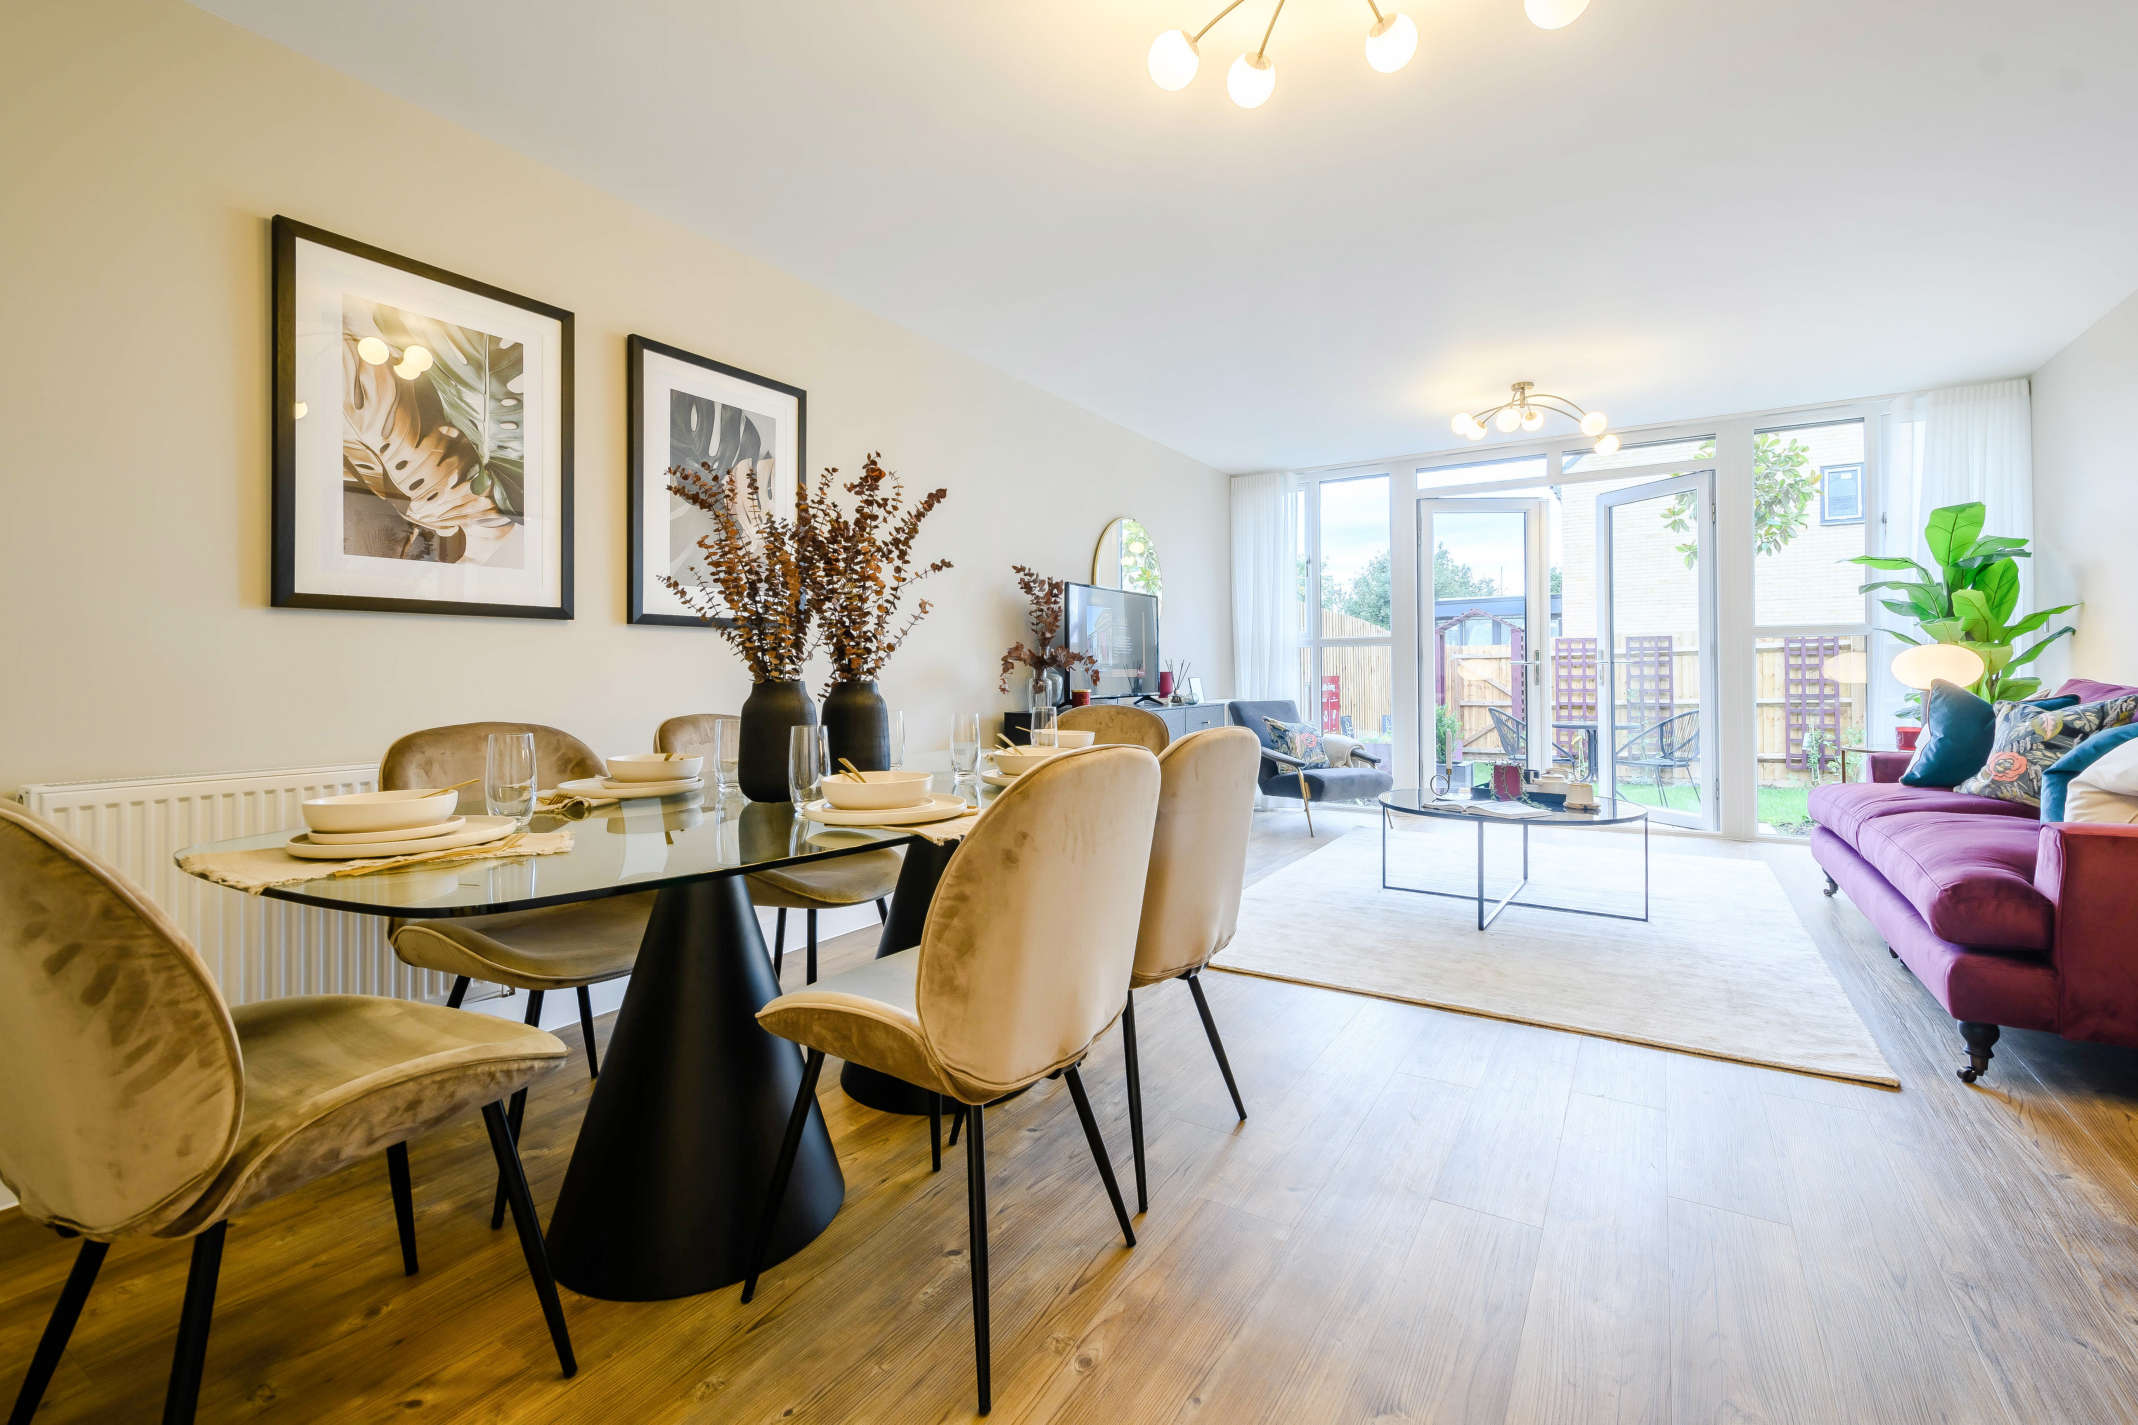 New homes in Bristol, new homes in Engine Common - The Tetbury